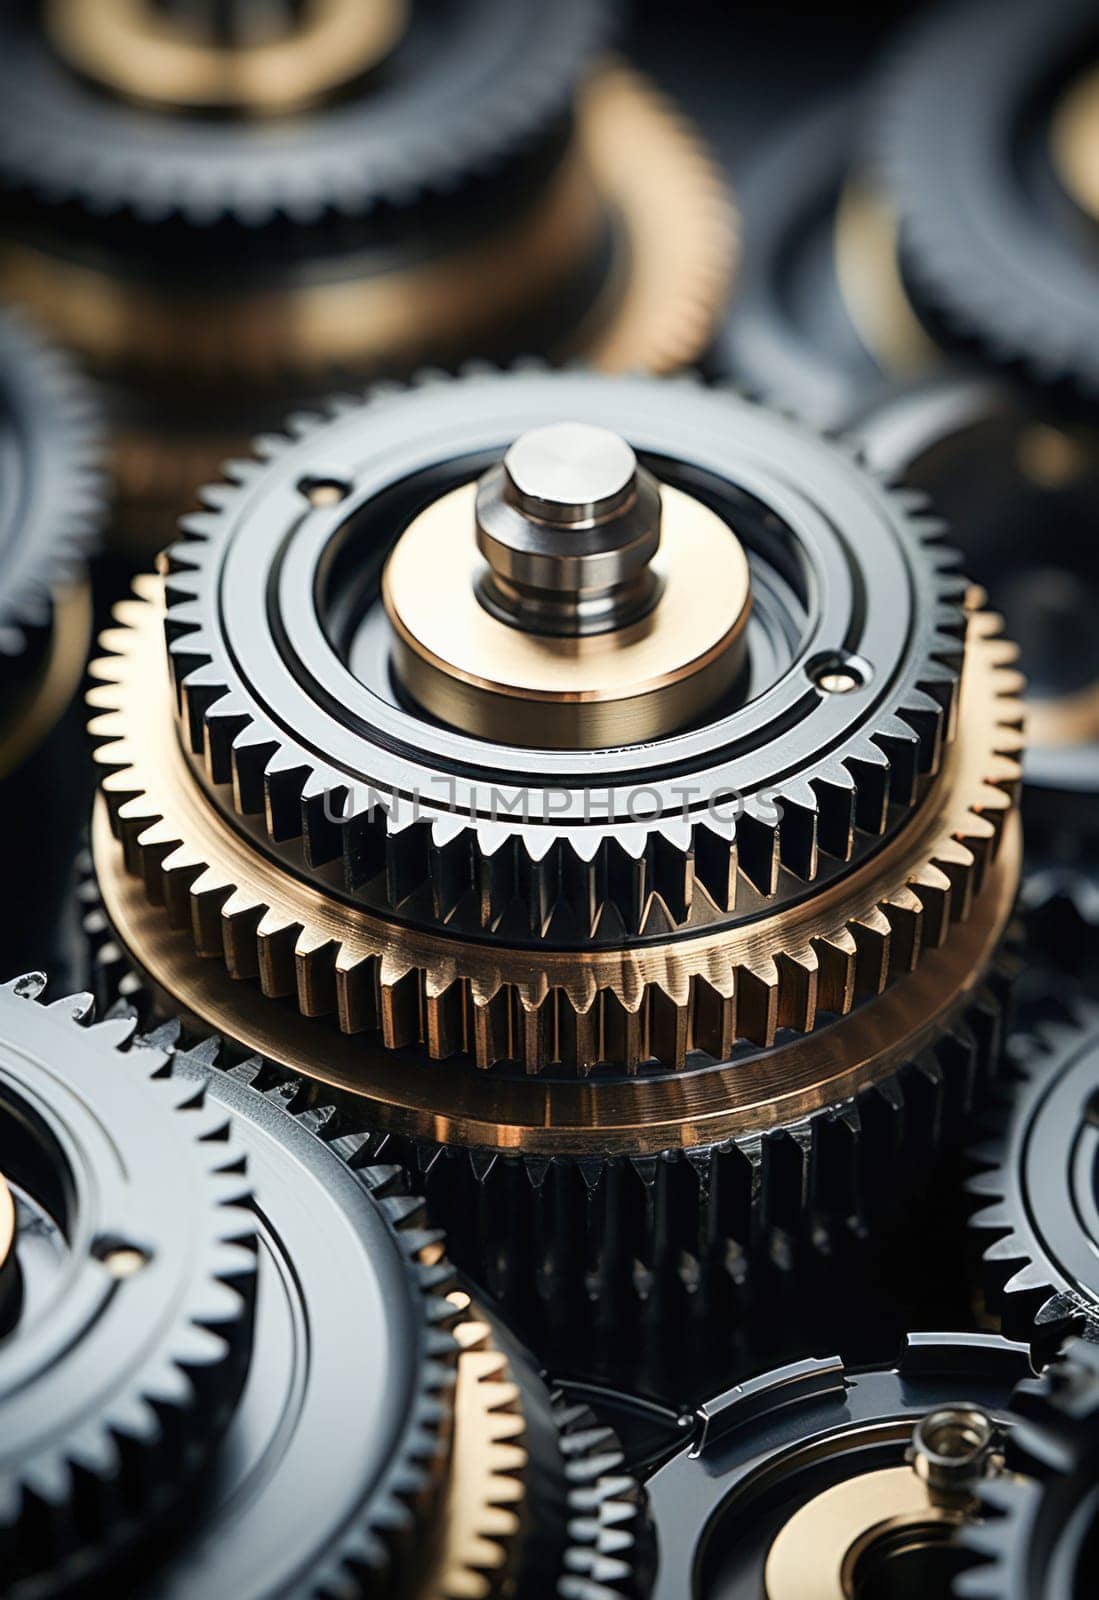 Detailed close-up of the intricate gears and internals of an antique clockwork. This captivating image highlights precision and delicate details.